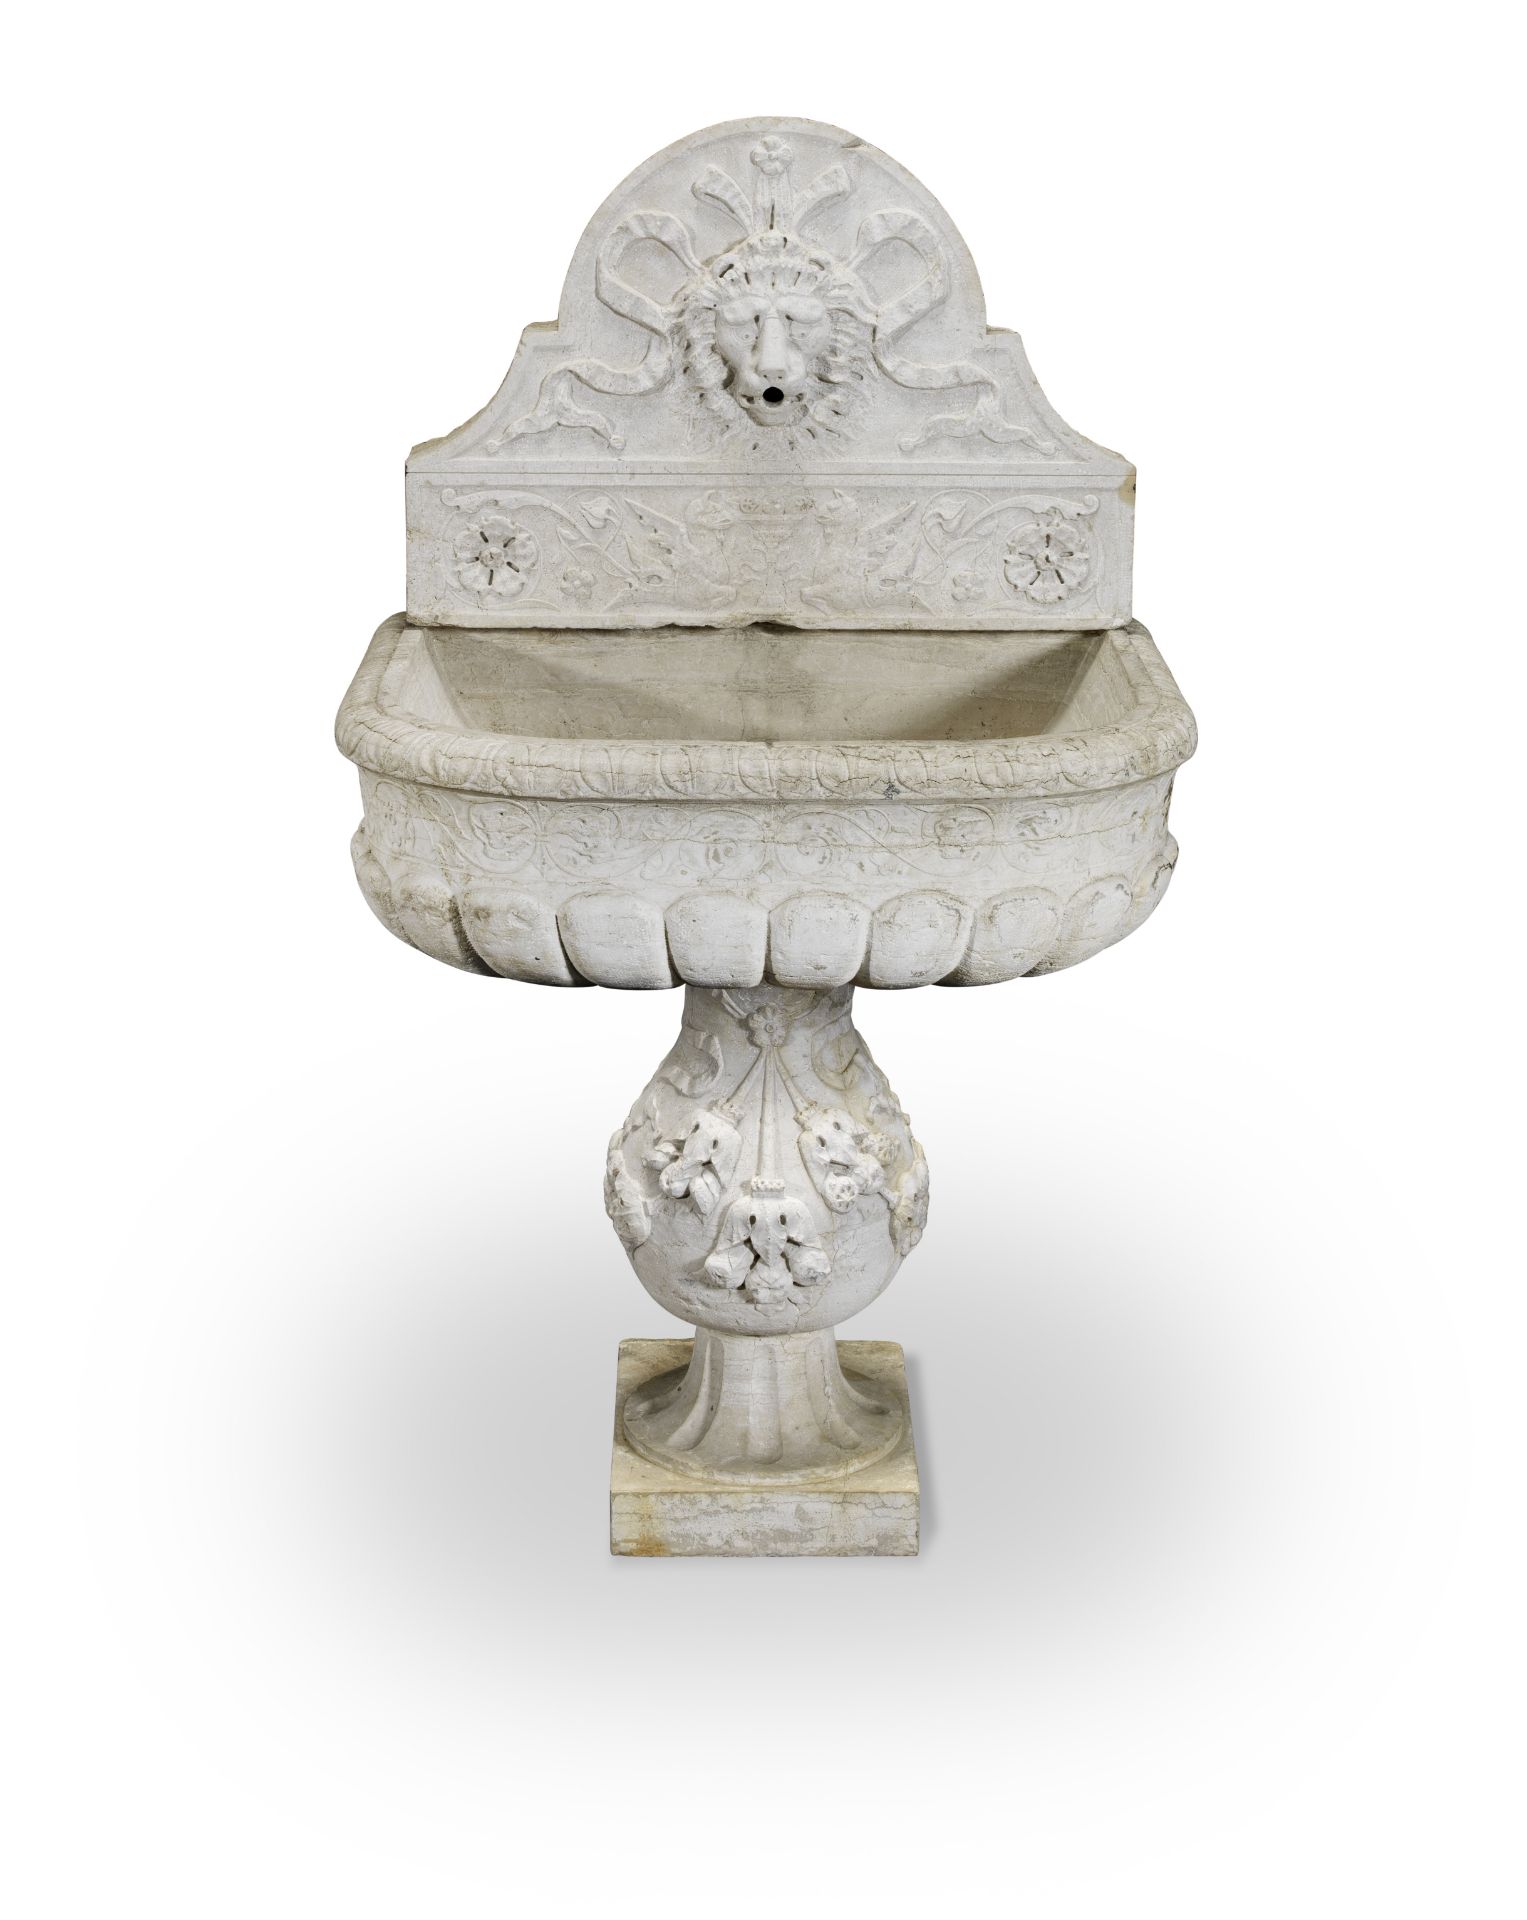 A 17th century North Italian carved Istrian stone wall fountain